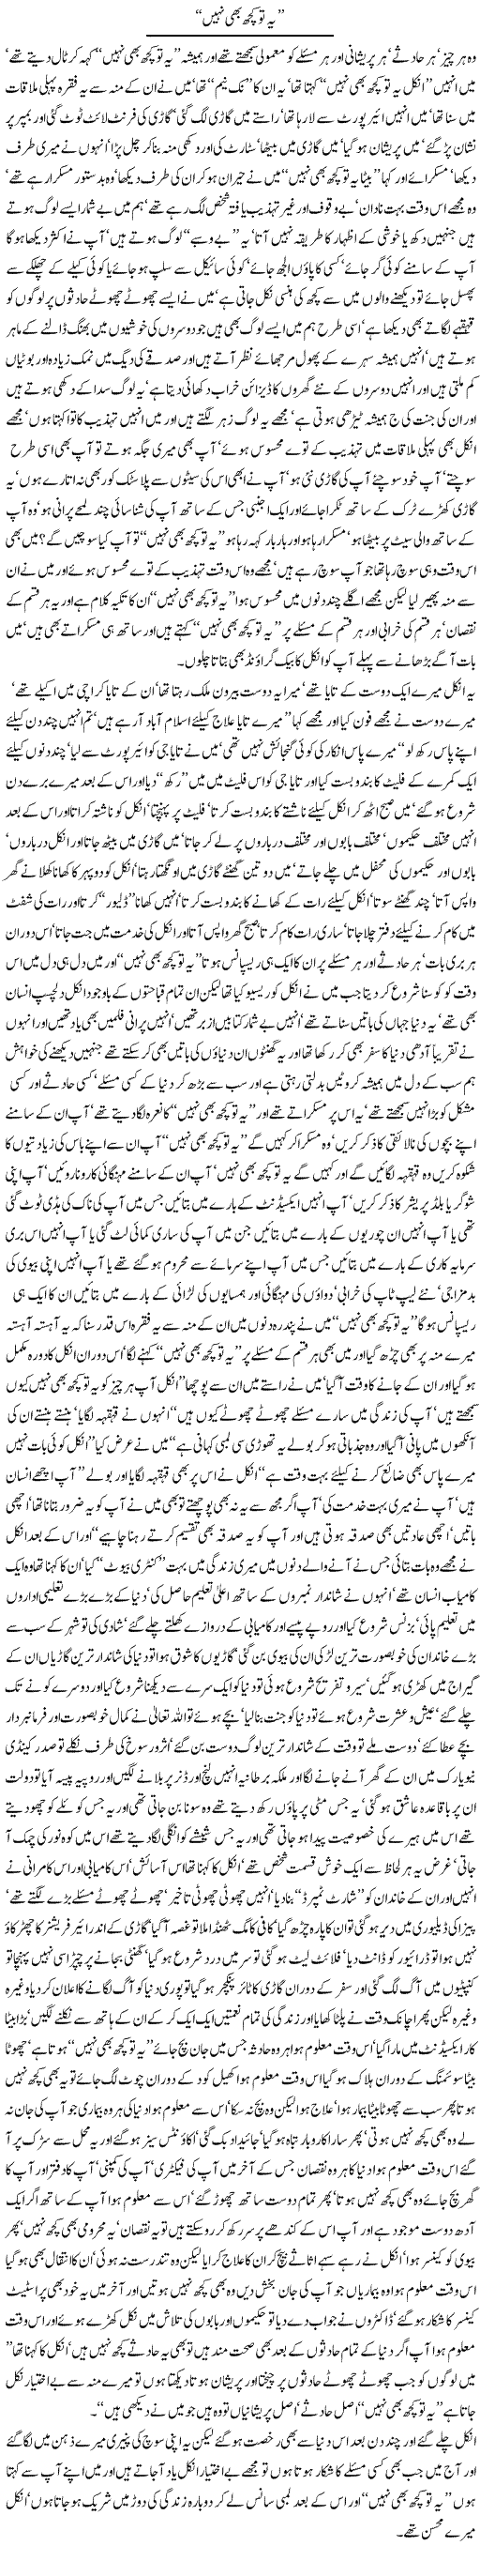 A Great Man Express Column Javed Chaudhry 14 August 2011